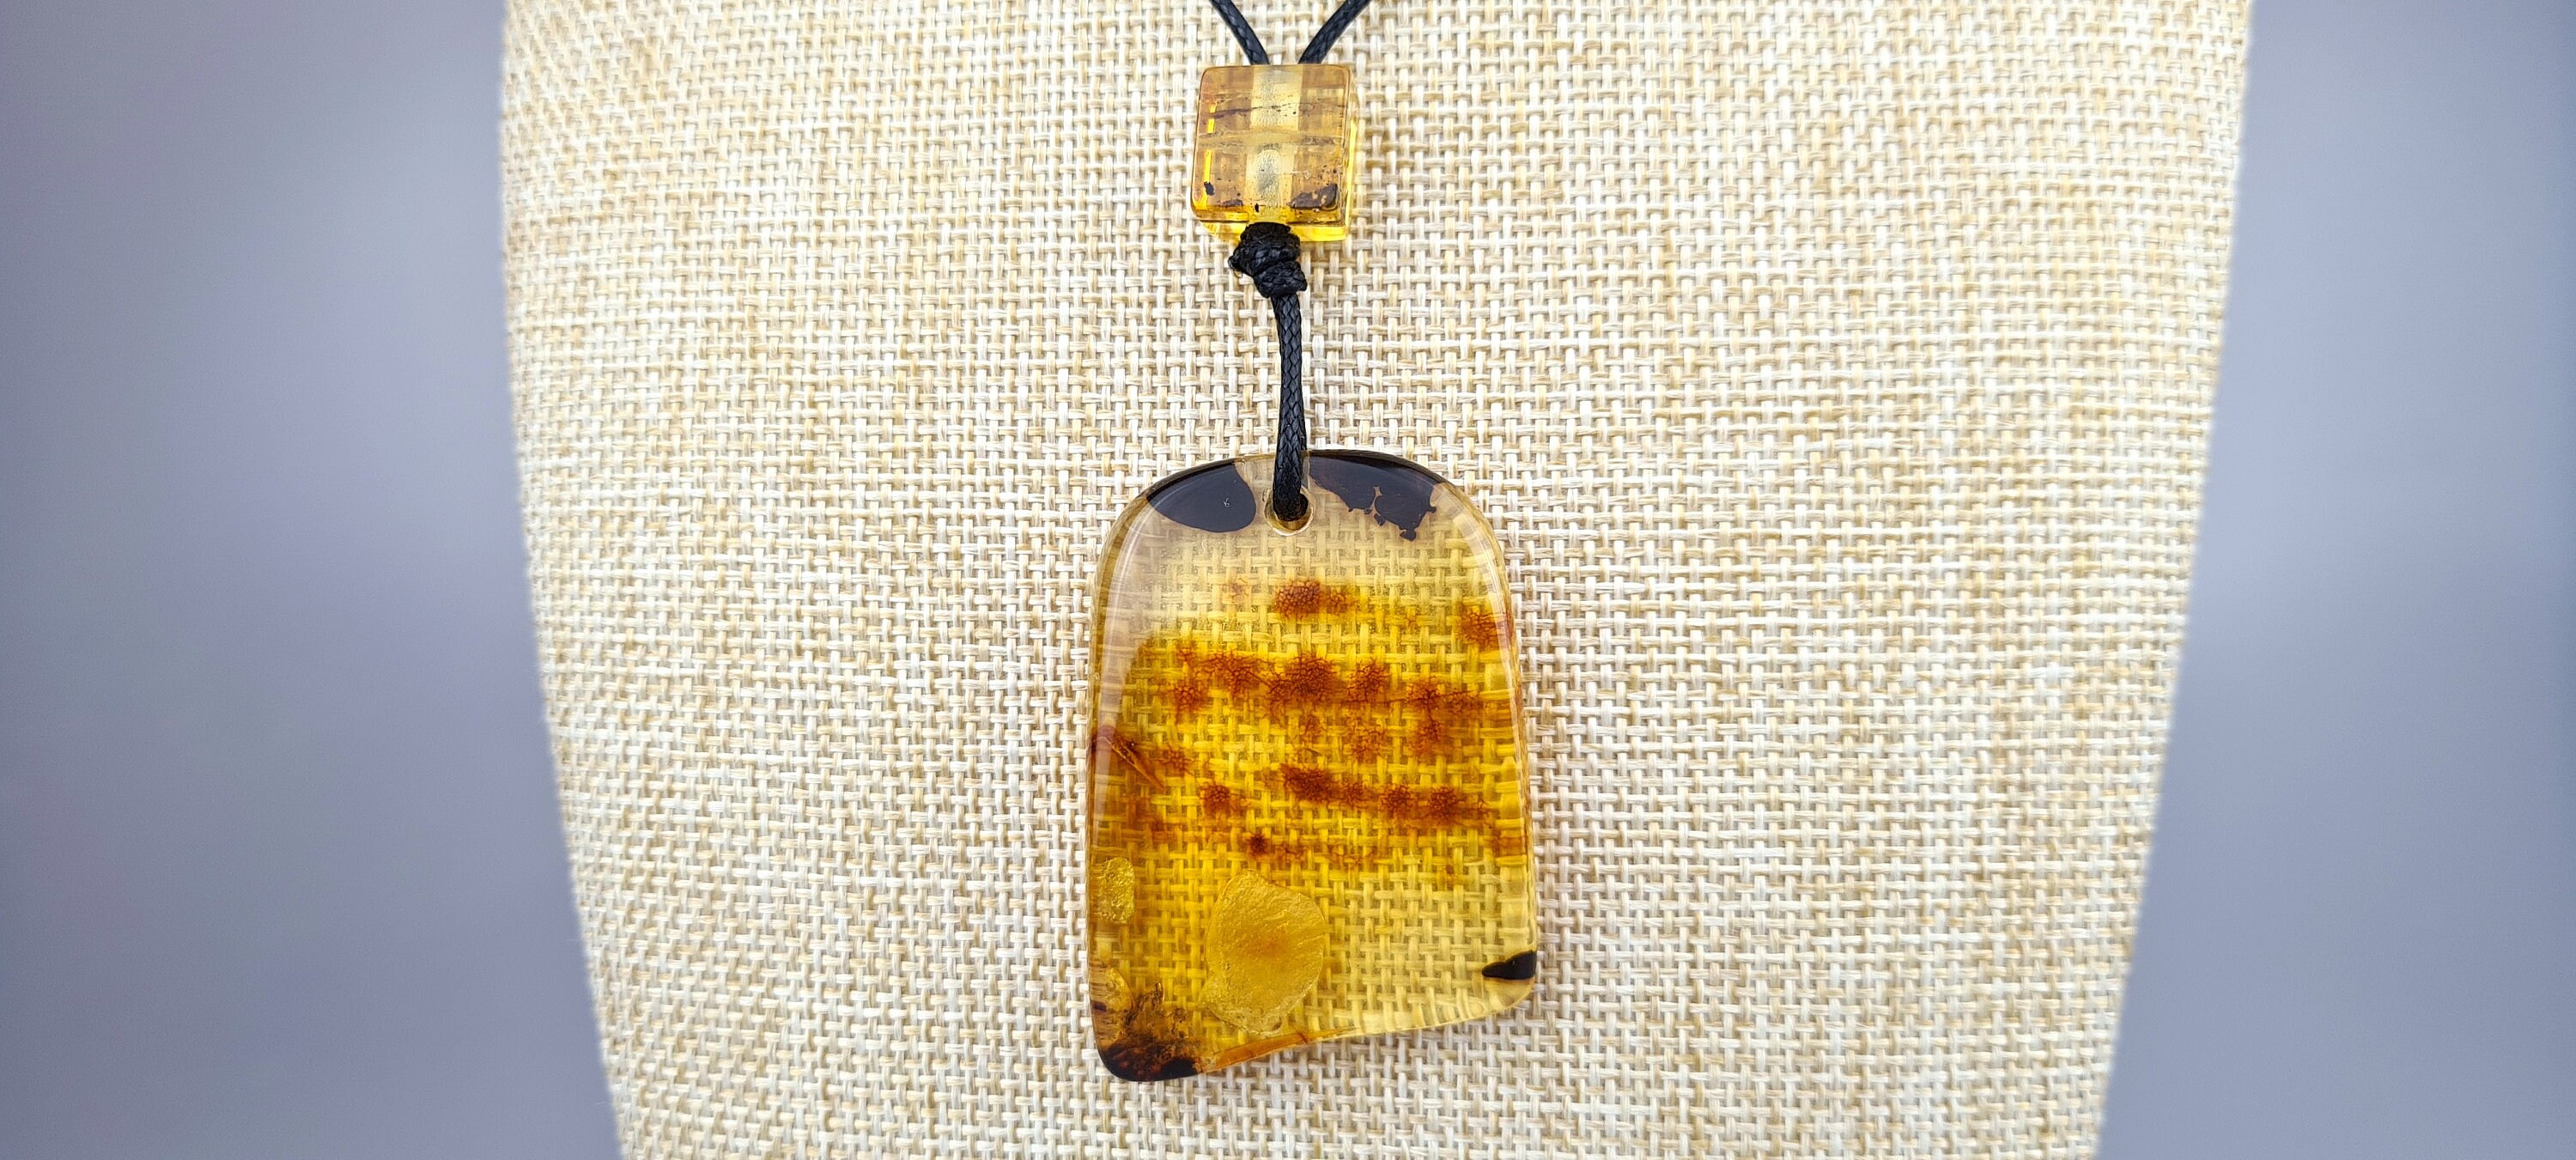 Beautiful Synthetic Amber Gemstone Cabochon, Loose Amber for Jewelry Making  Stone, Wholesale Lot, Discounted Price, Mix Shape and Size Lot 